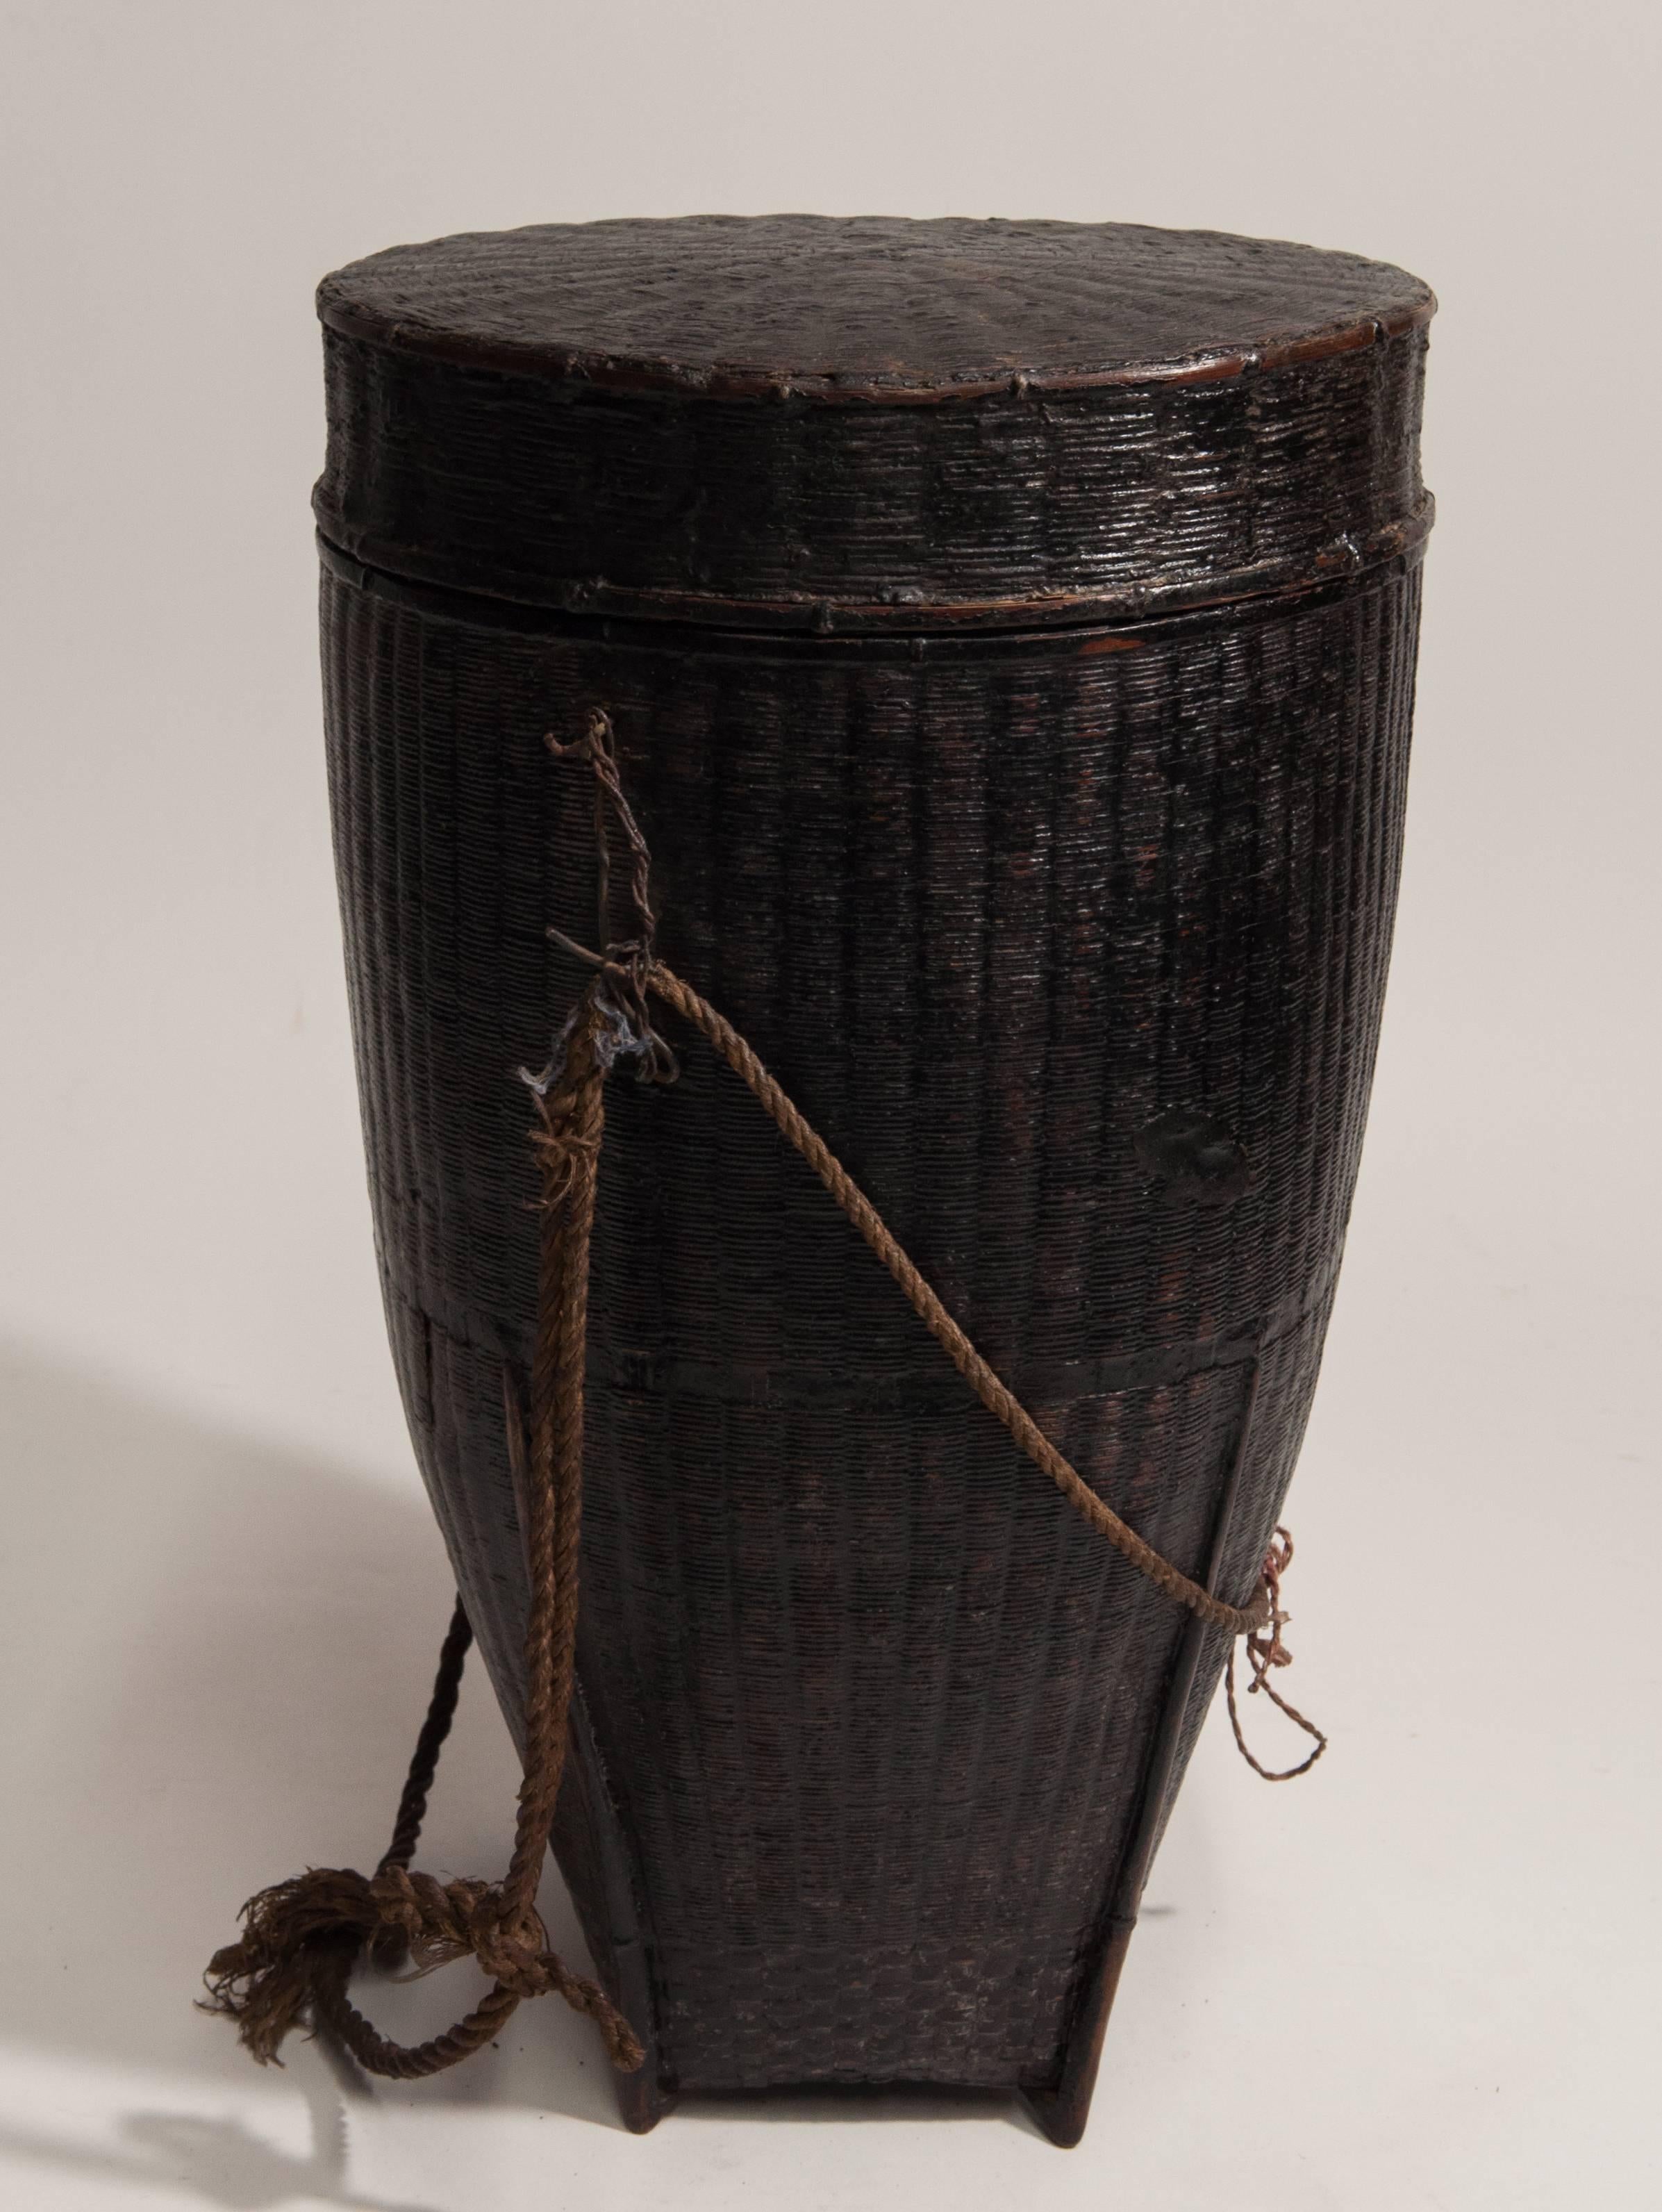 Hand-Crafted Tribal Storage Basket with Lid and Lacquer, Karen of Burma, Mid-20th Century